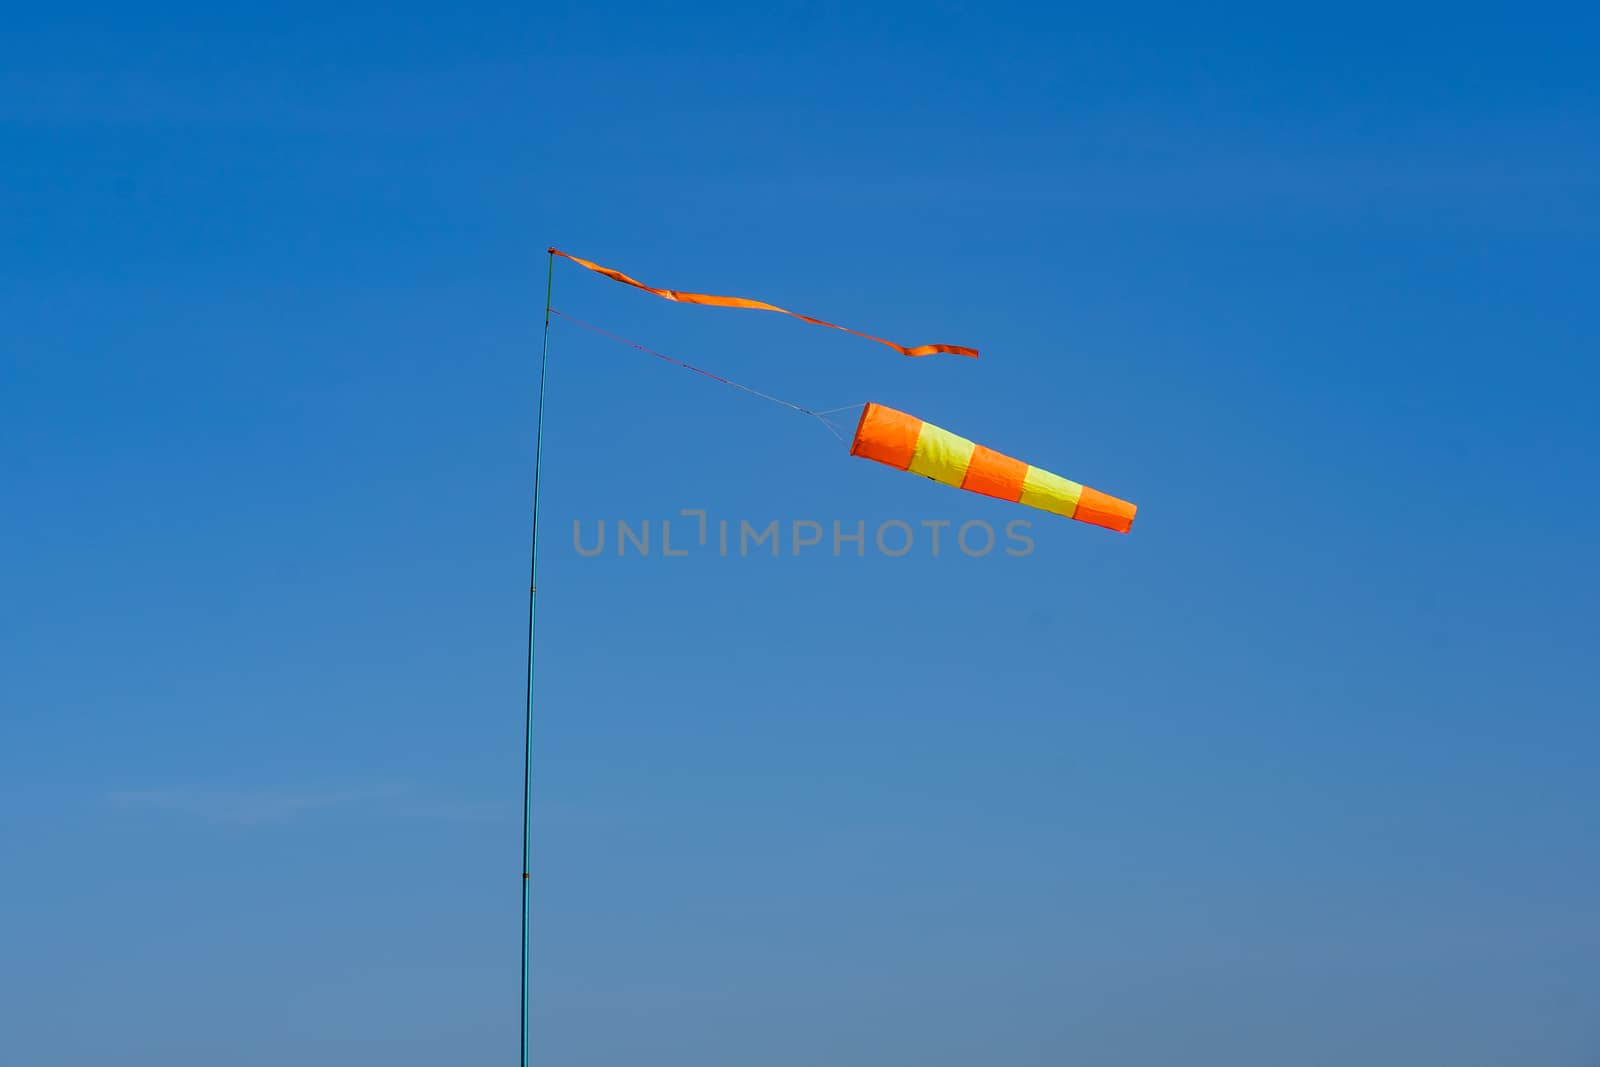 flagpole with wind indicator on a background of blue sky on a windy day